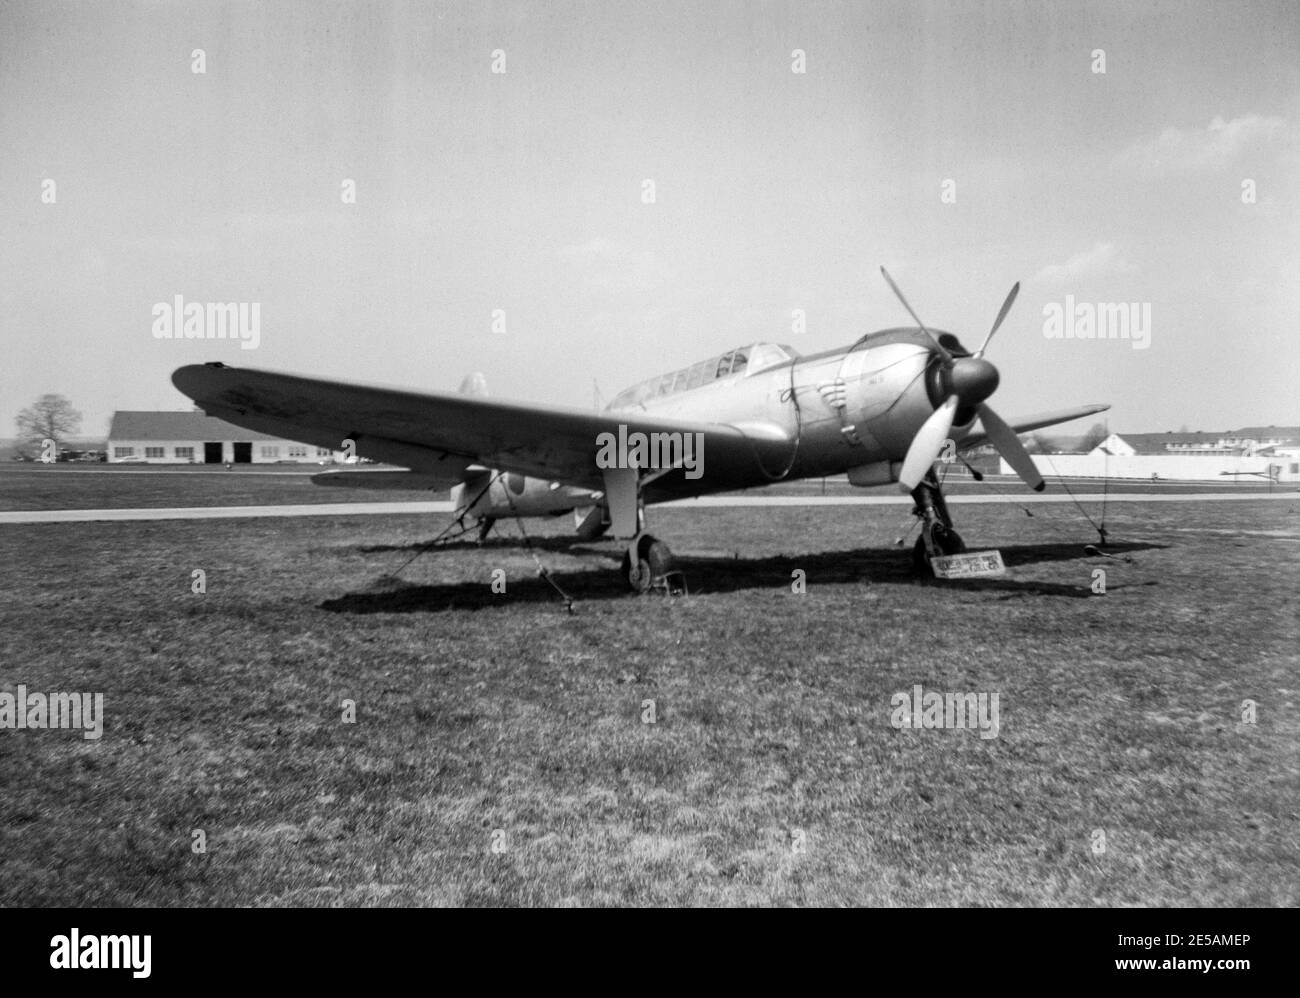 Vintage 1958 black and white photograph showing a Japanese Air Force Nakajima B6N-2 Tenzan, allied code name Jill,  aircraft on display at The Naval Air Station in Willow Grove, Pennsylvania, USA. Captured by The Allied Forces in Japan in 1945. Stock Photo